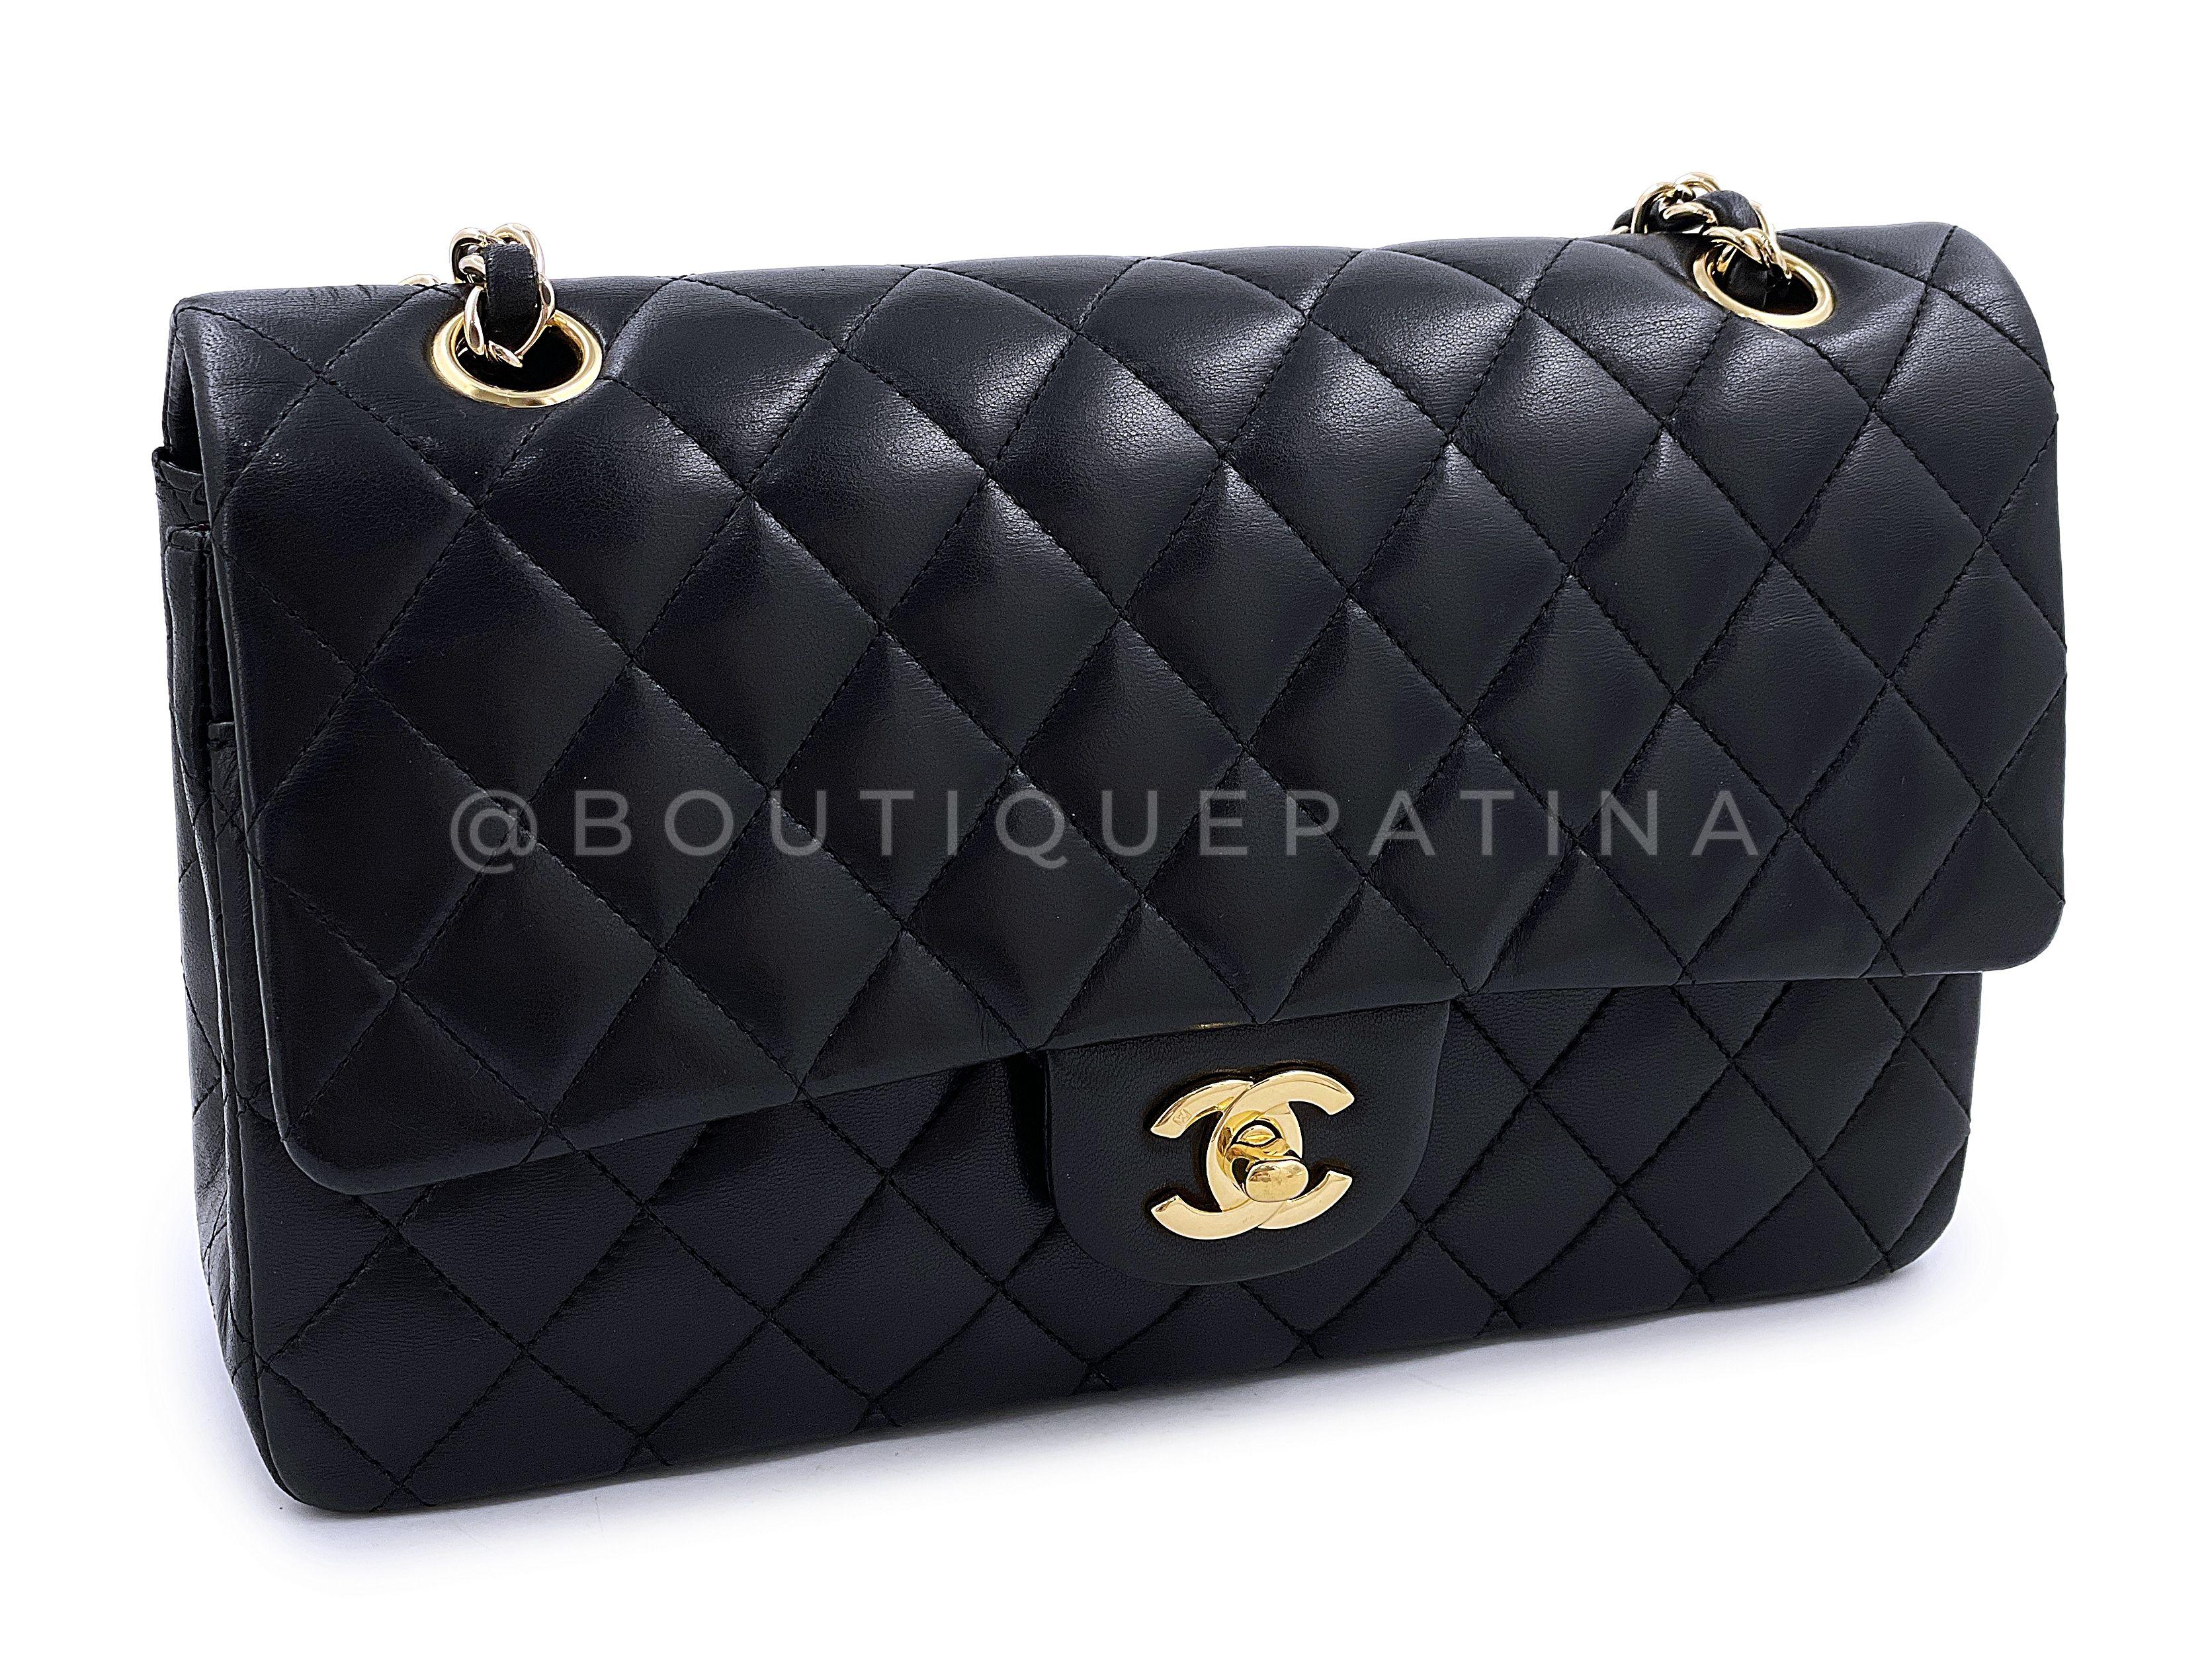 Chanel 2008 Vintage Black Medium Classic Double Flap Bag 24k GHW Lambskin 67582 In Excellent Condition For Sale In Costa Mesa, CA